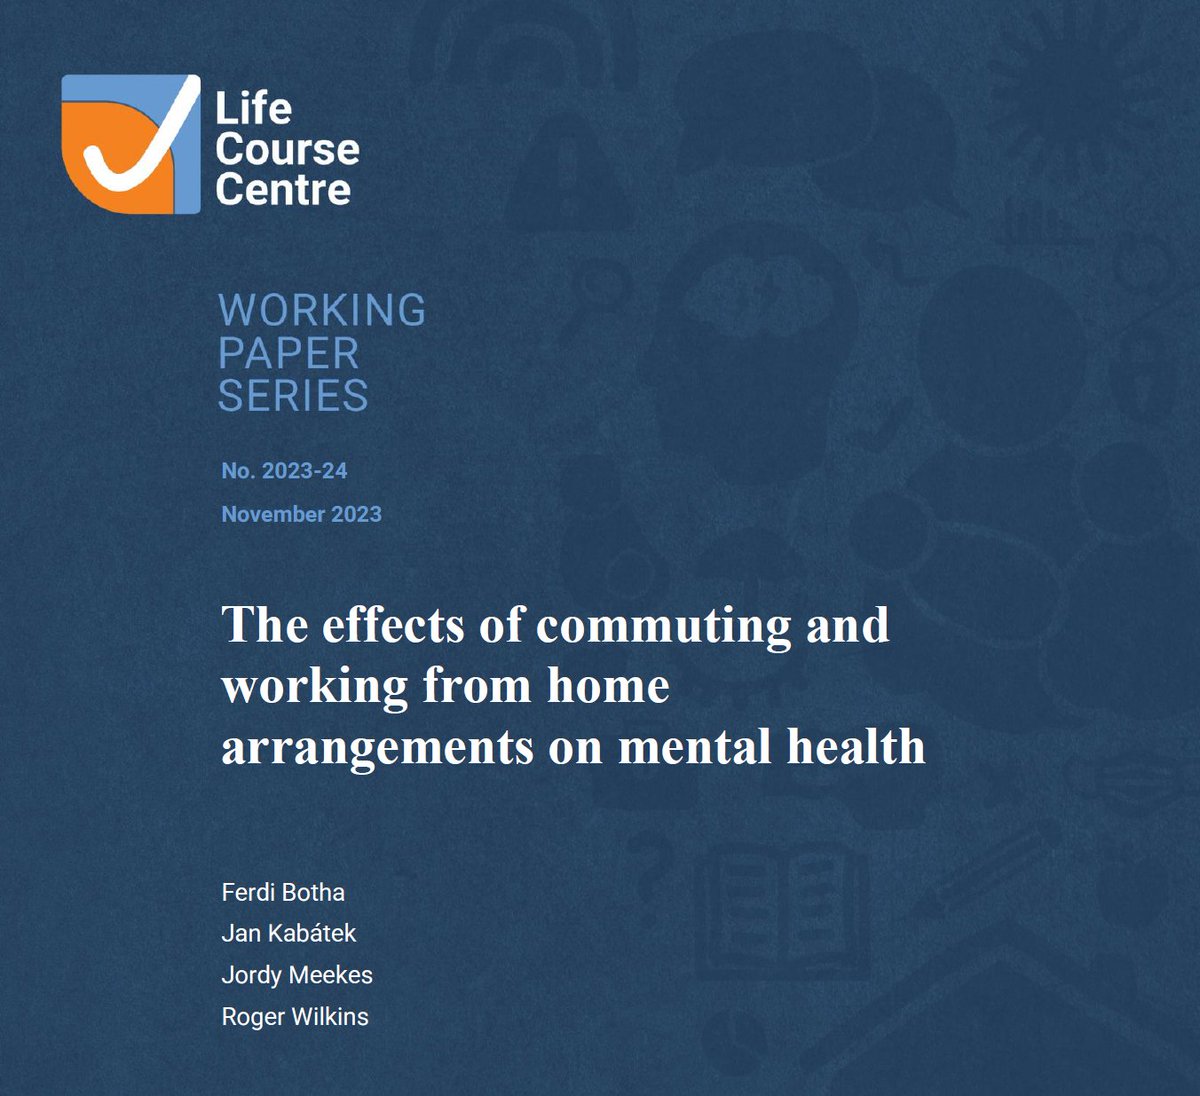 📢 New Life Course Centre Working Paper 📢 @FerdiBotha_MI @JanKabatek @RogerWilkins_au @MelbInstUOM + Jordy Meekes @UniLeidenNews examine effects of changes in commuting time + working from home (WFH) on the mental health of Australian men & women 👇 lifecoursecentre.org.au/working-papers…